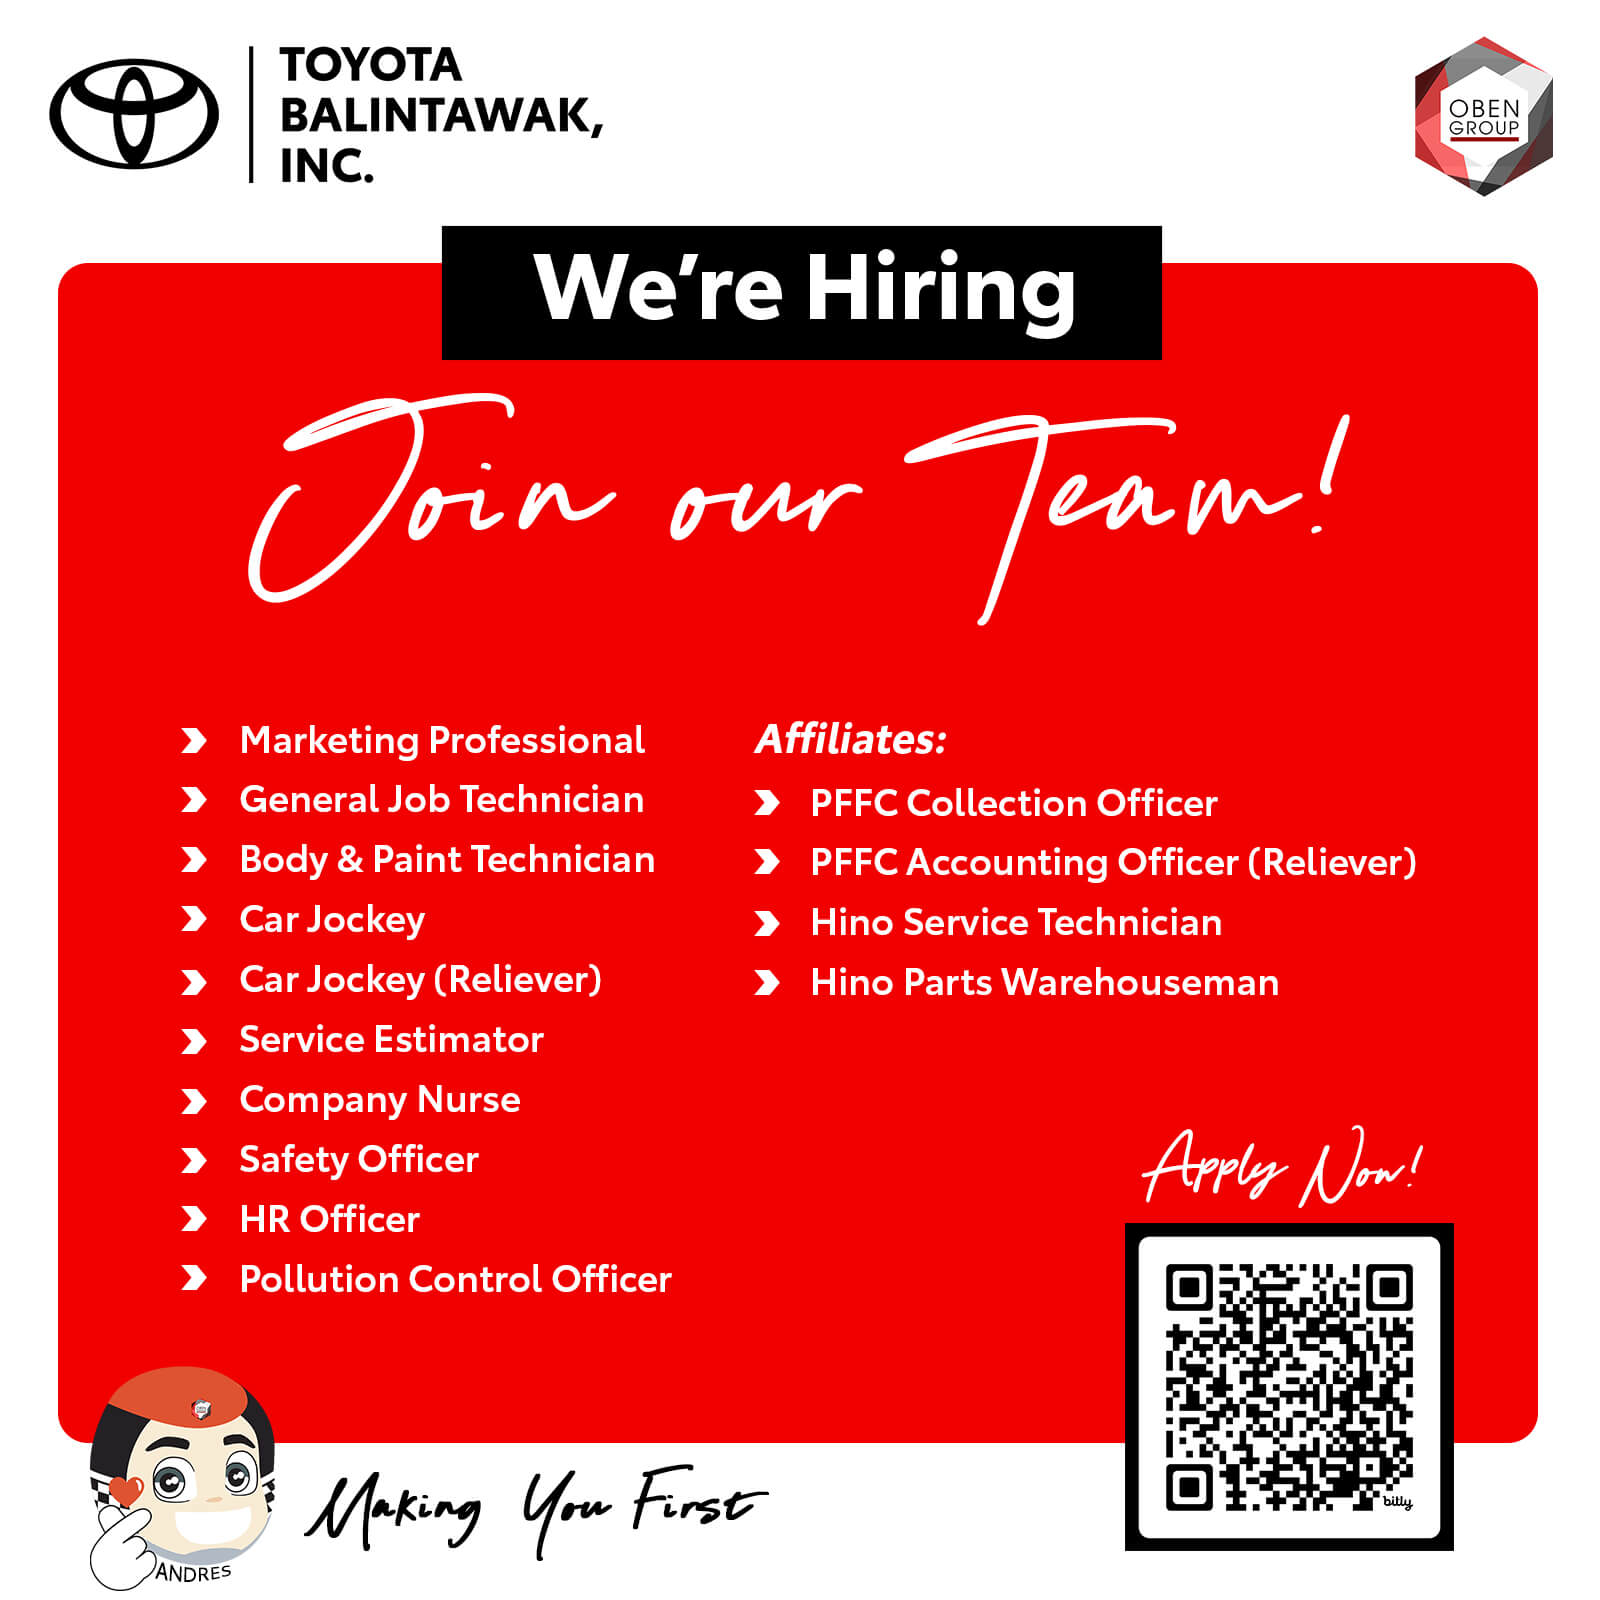 We are HIRING!